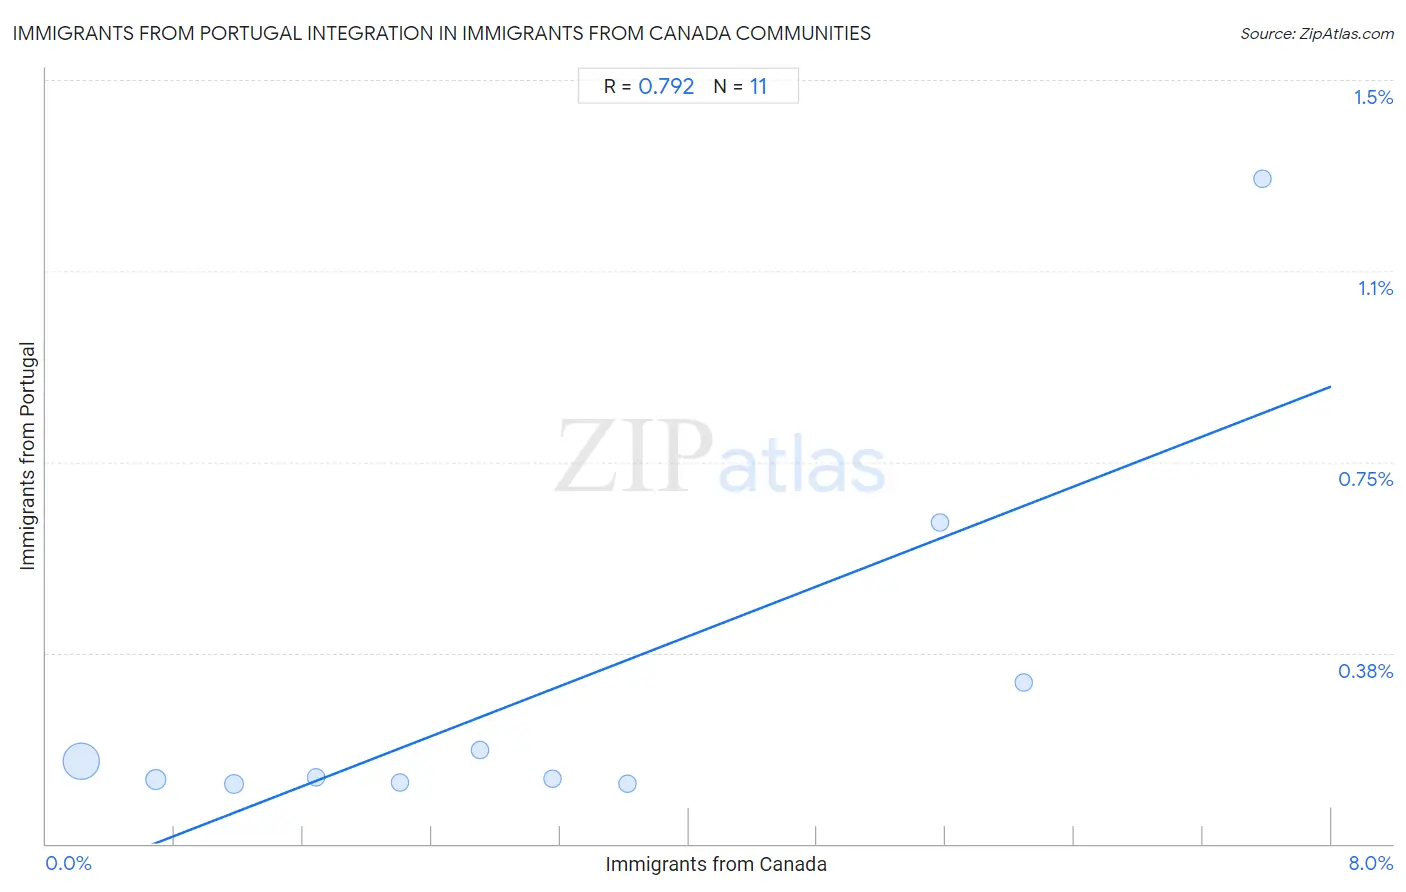 Immigrants from Canada Integration in Immigrants from Portugal Communities